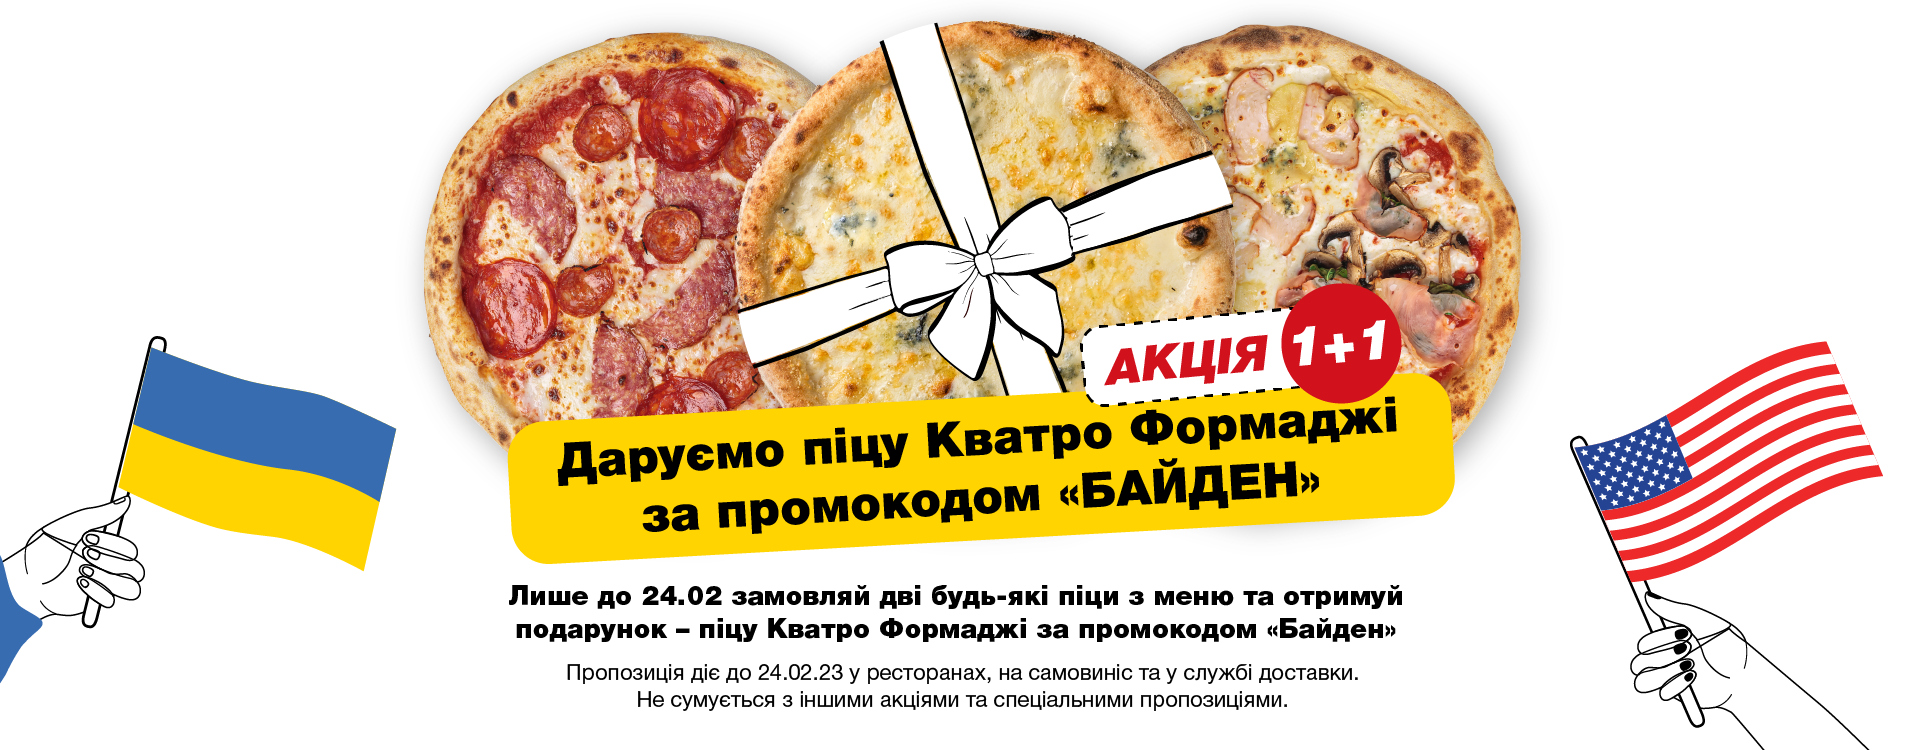 PROMOTION 1+1 on pizza at iL Molino